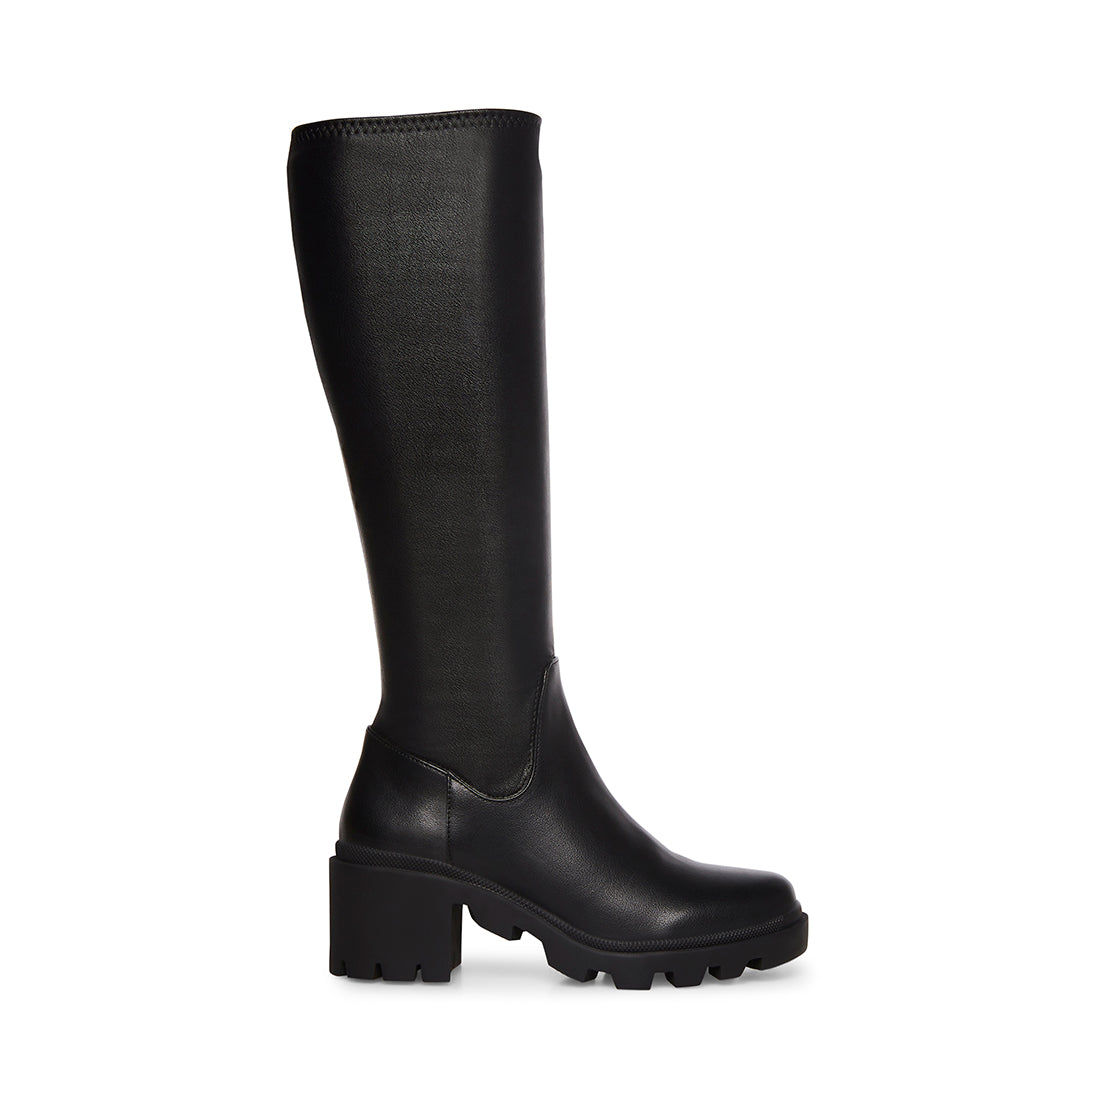 ABERDEEN Black Utility Boots | Women's Black Leather Utility Boots ...